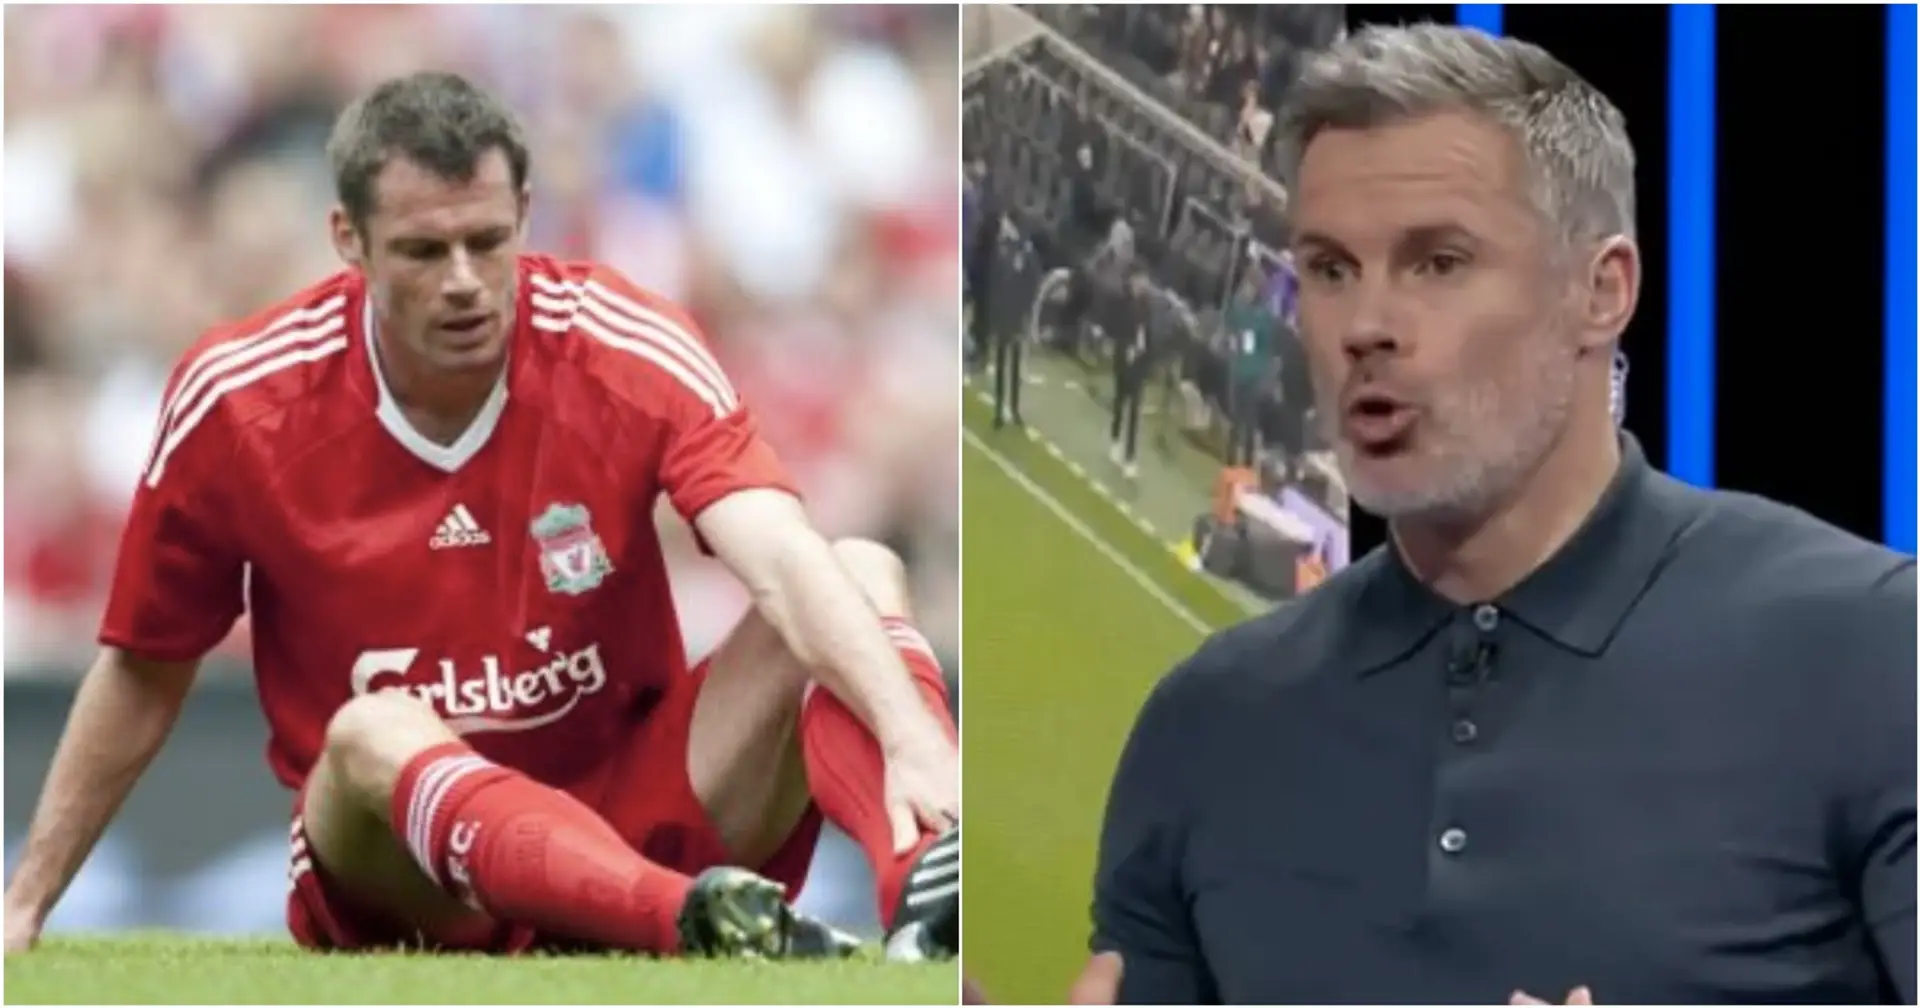 'They made me feel smaller and weaker': Jamie Carragher names worst opponent ever - not Man United